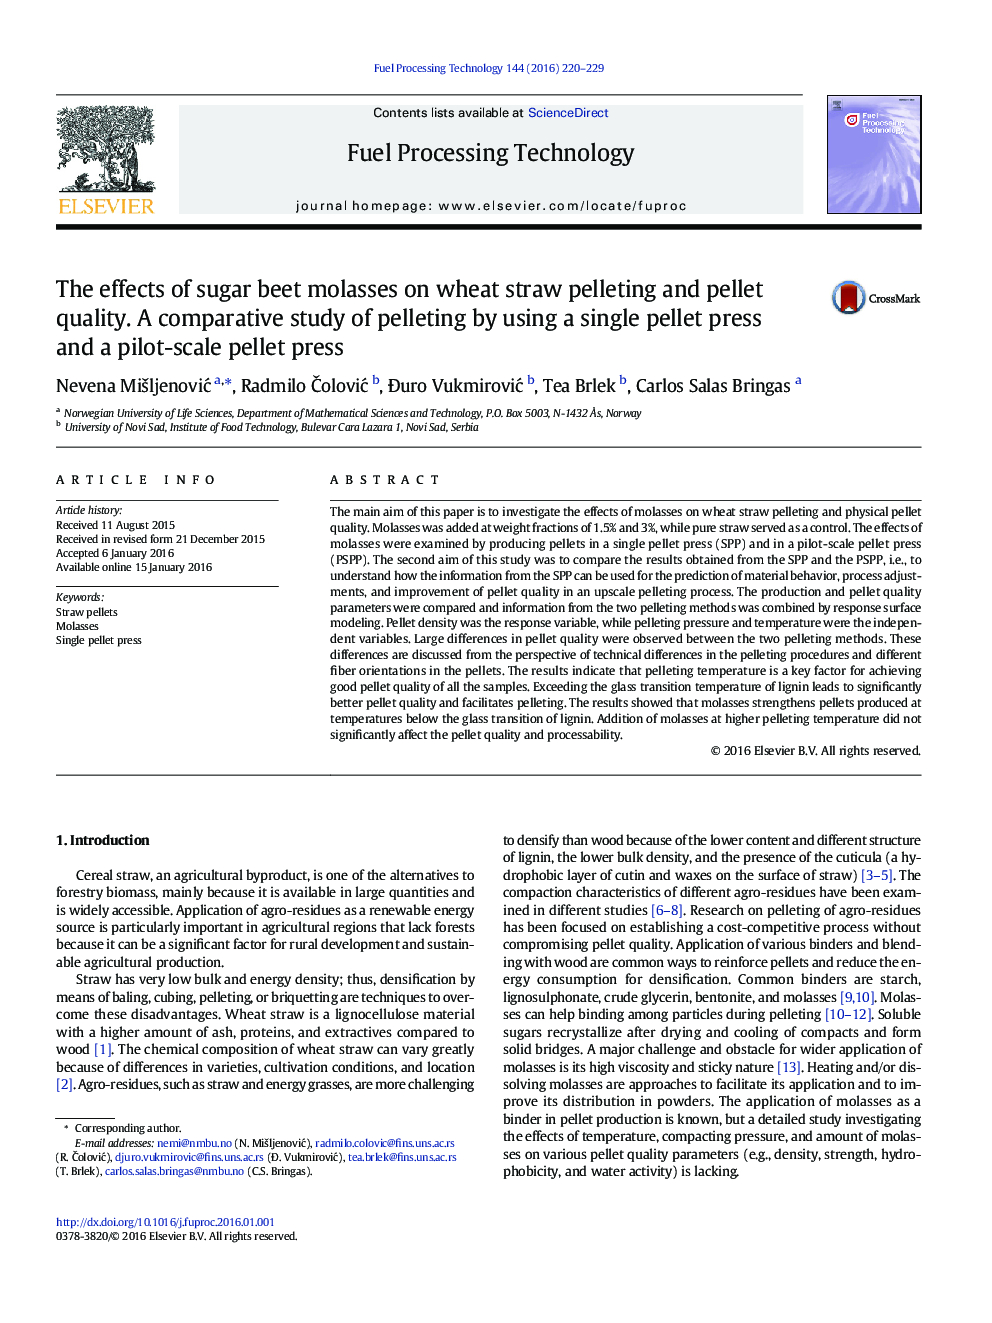 The effects of sugar beet molasses on wheat straw pelleting and pellet quality. A comparative study of pelleting by using a single pellet press and a pilot-scale pellet press